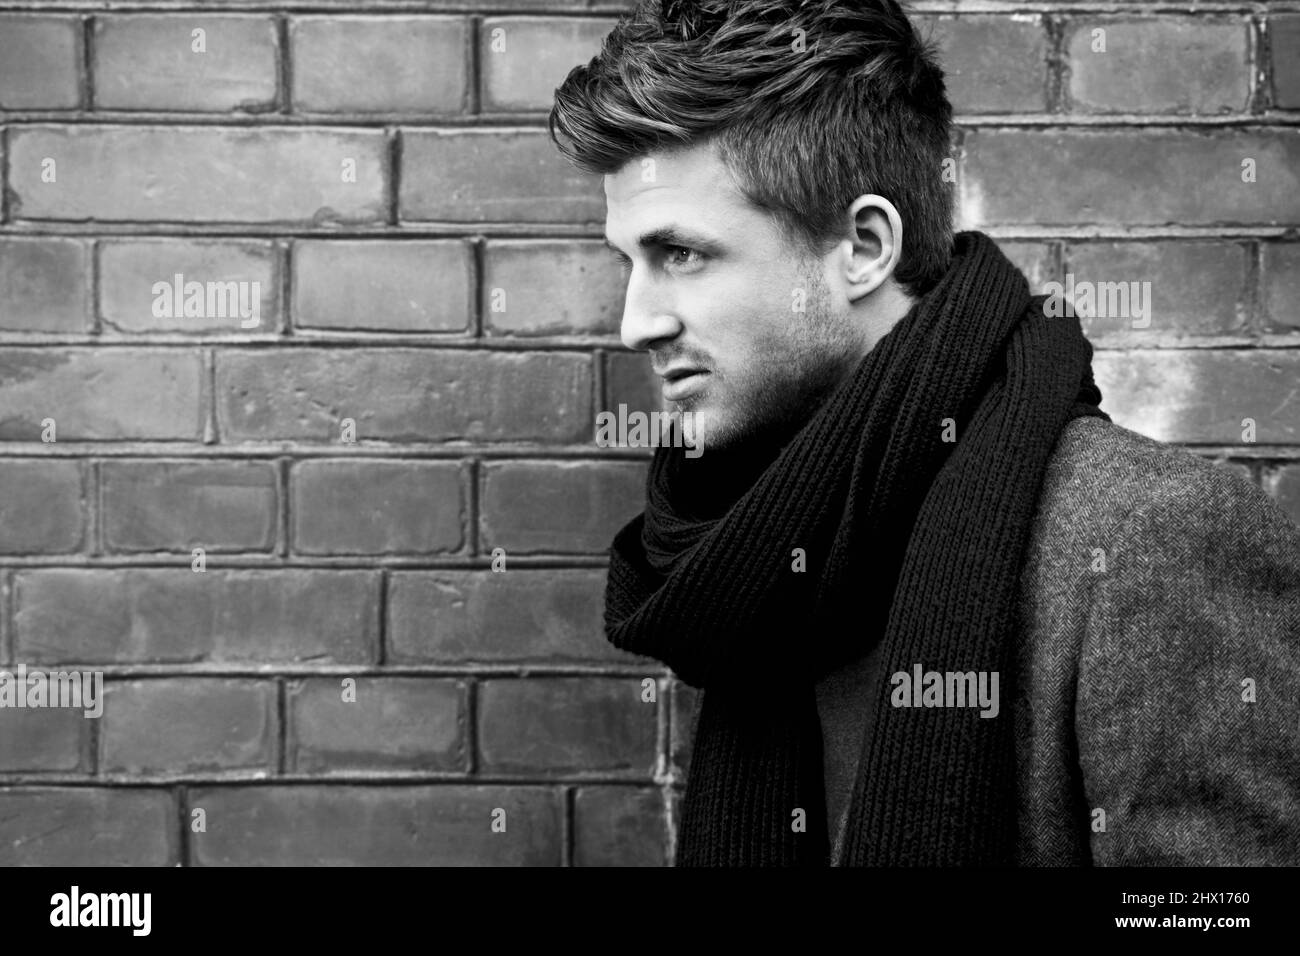 Bring style to Winter. Black and white shot of a stylishly-dressed young man standing in the street. Stock Photo